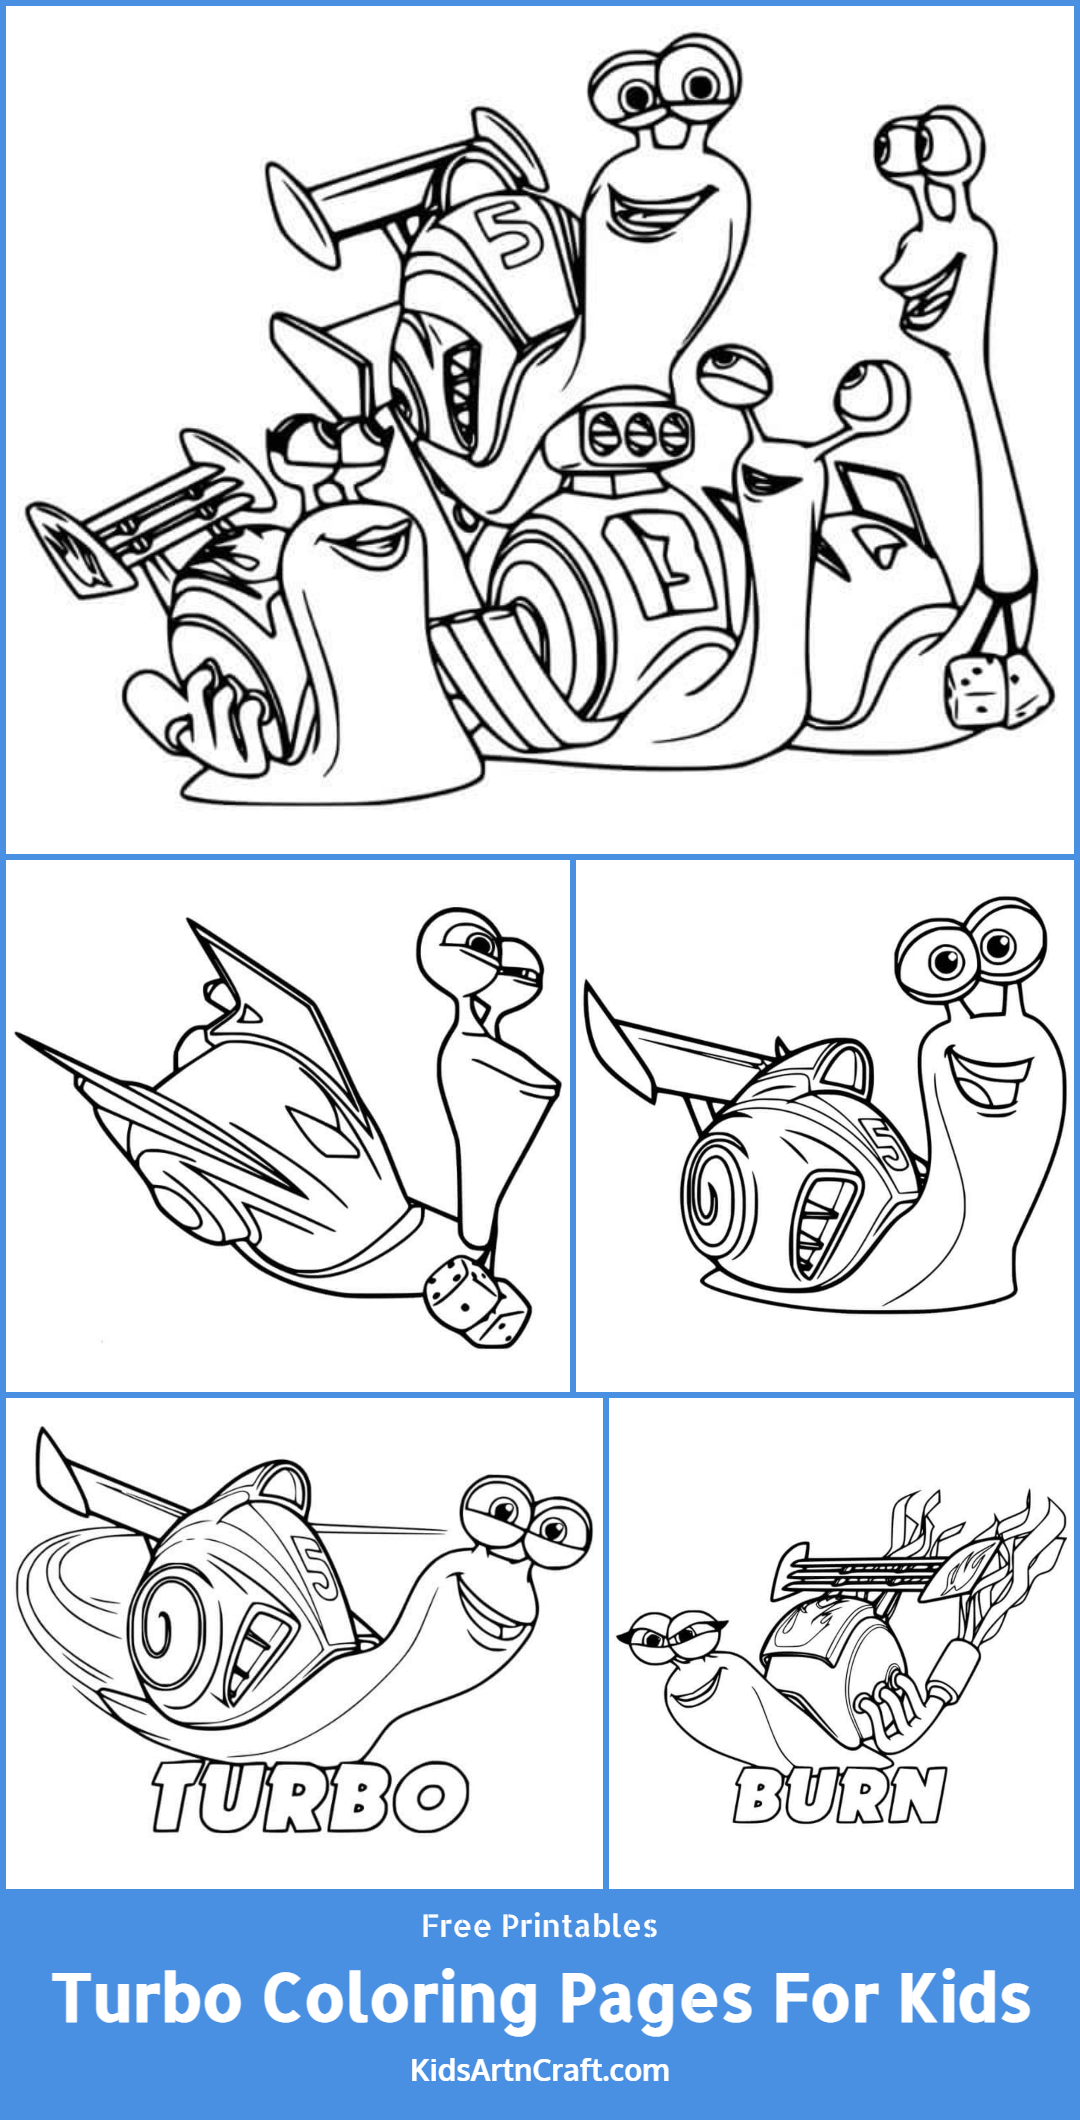 Turbo Coloring Pages For Kids – Free Printables